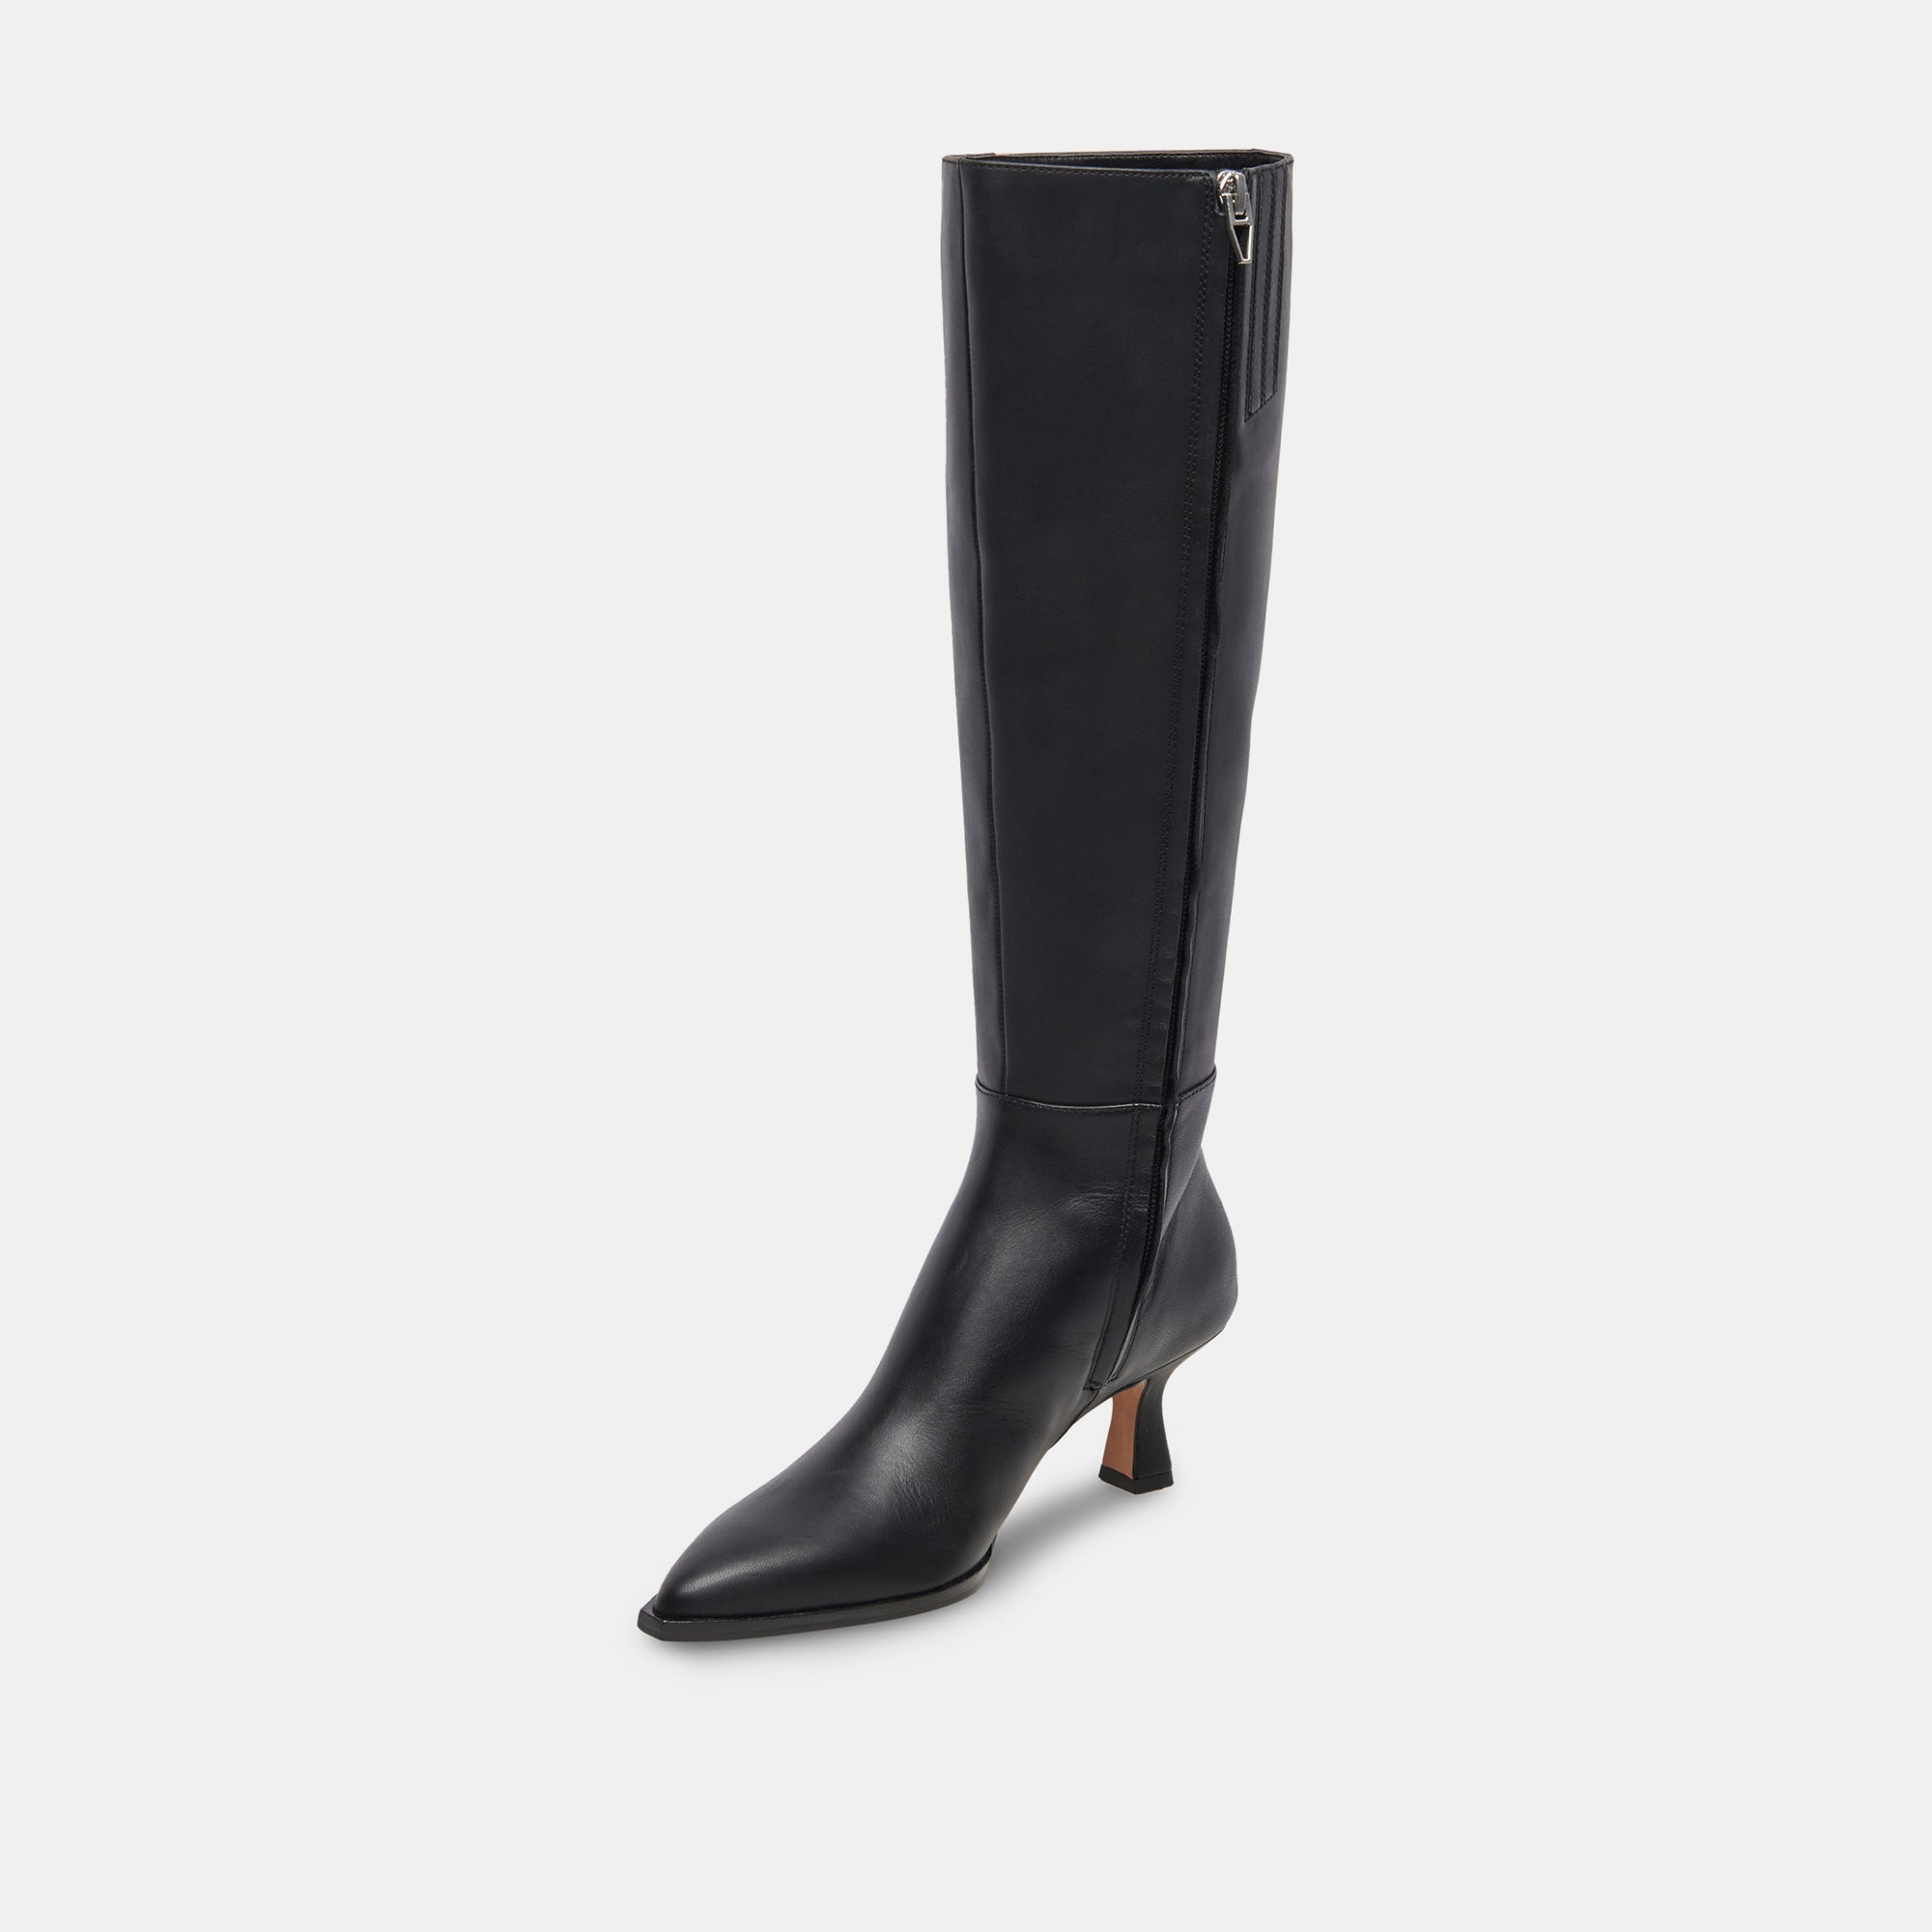 AUGGIE BOOTS BLACK LEATHER – Dolce Vita